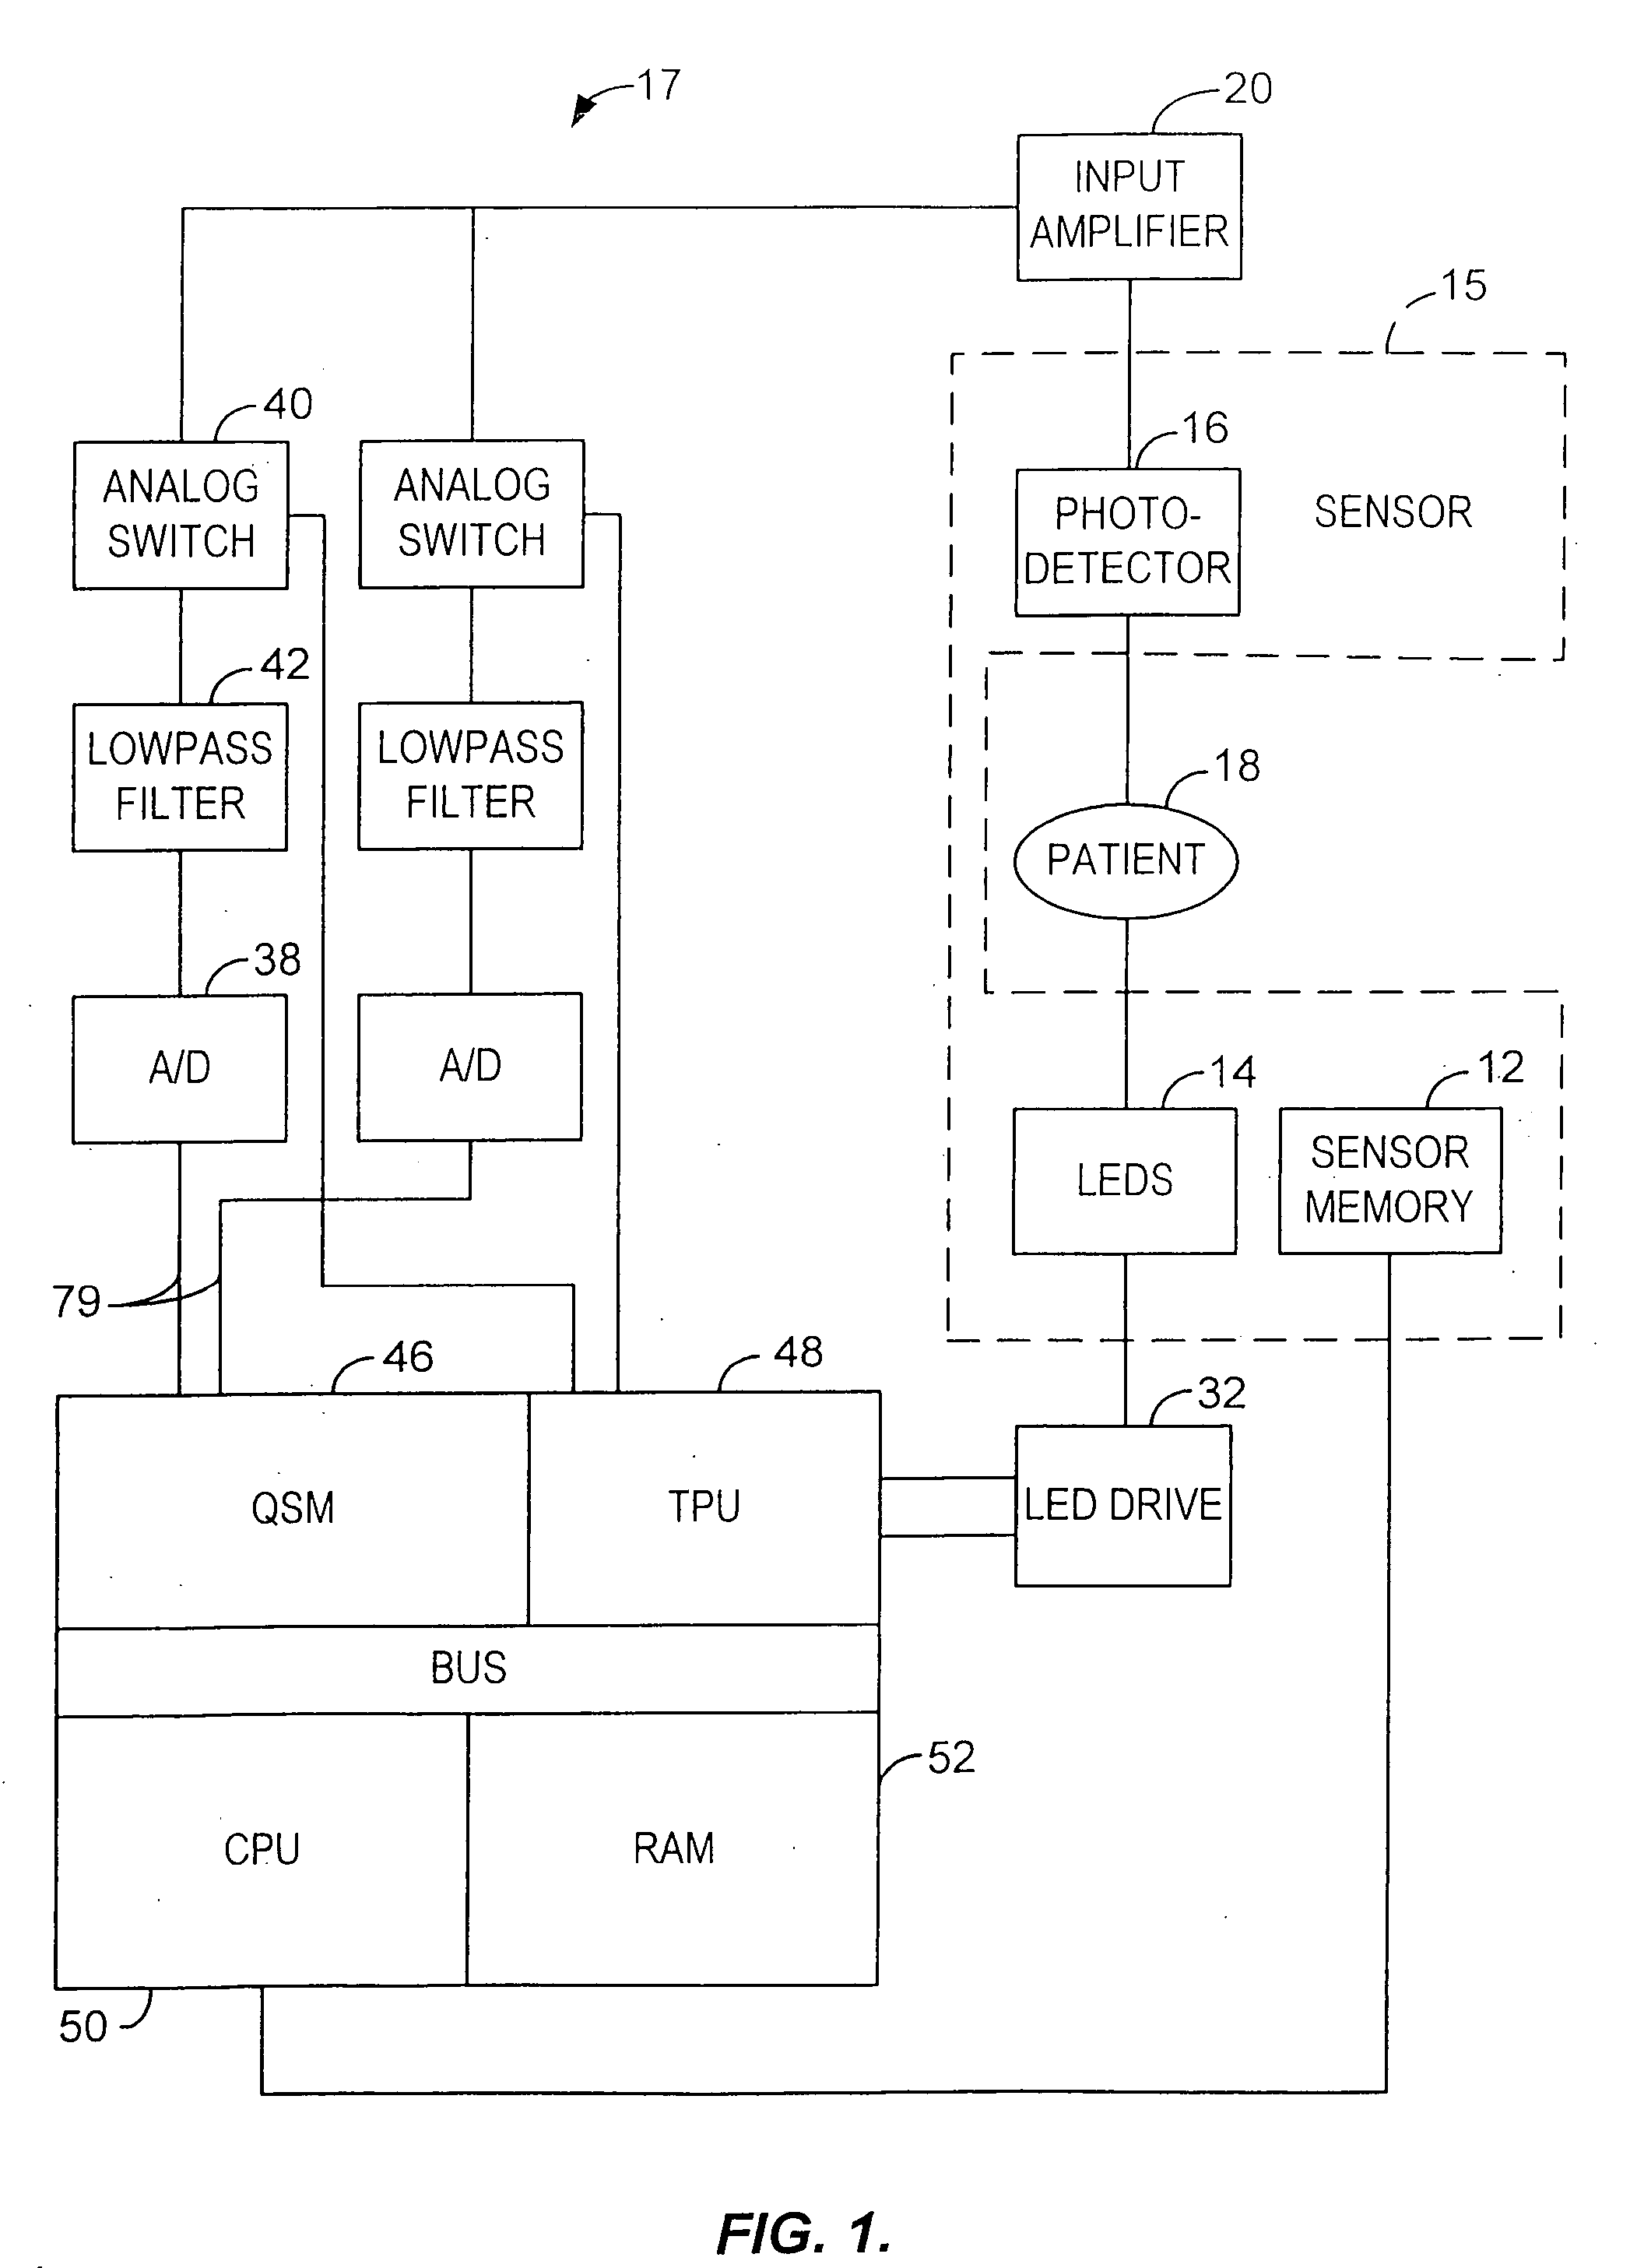 Pulse oximeter sensor with piece-wise function